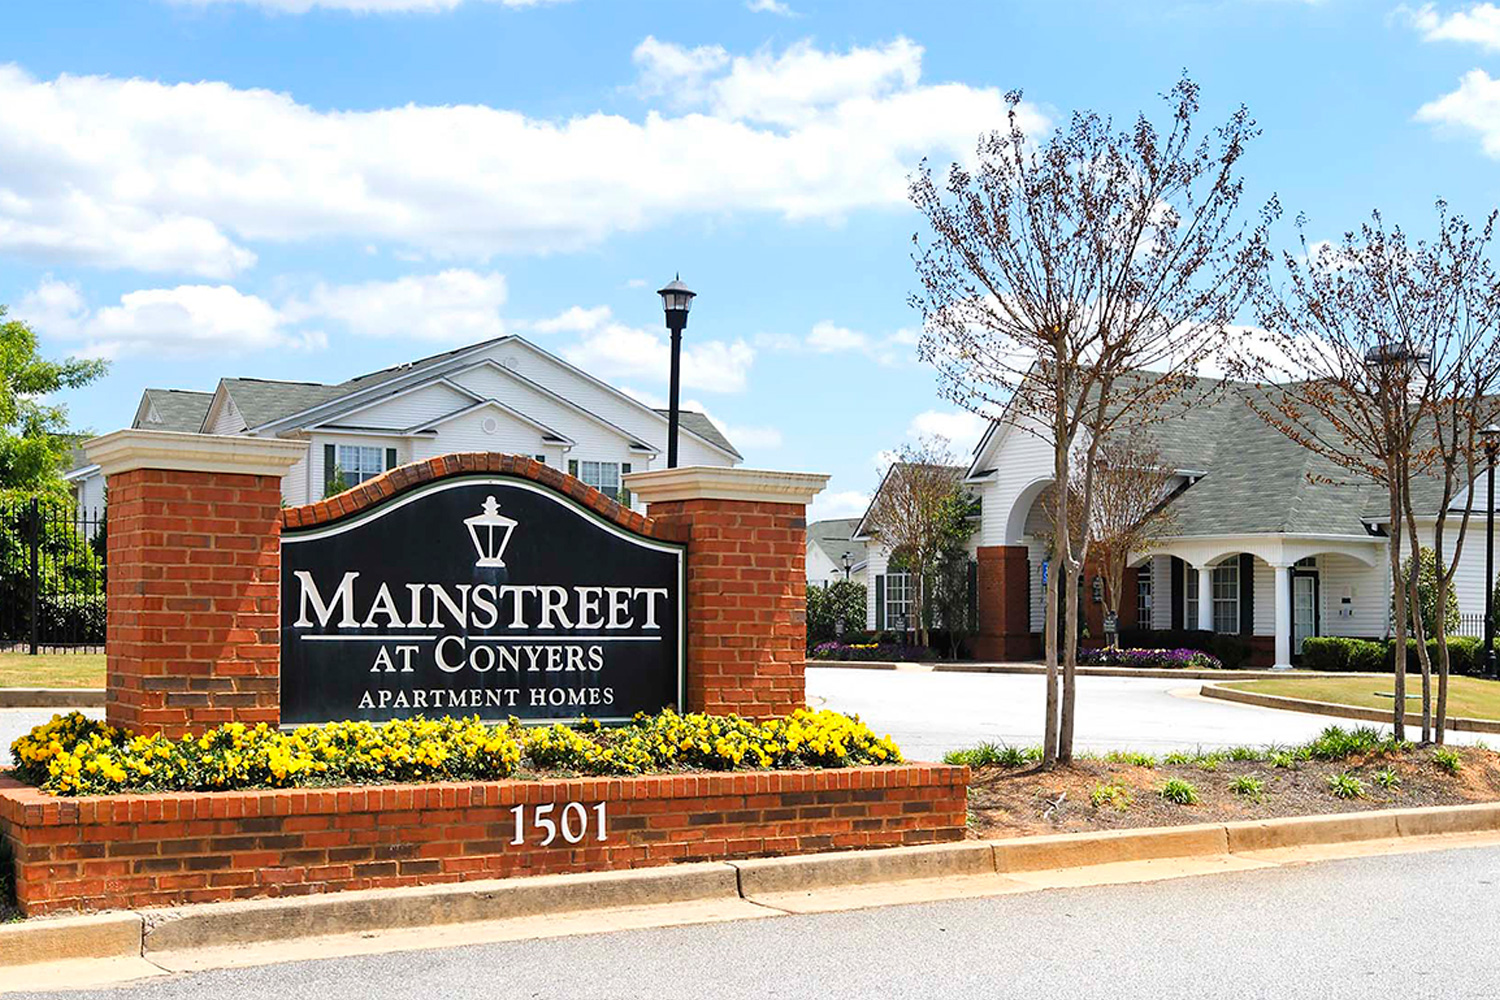 Balfour Beatty Communities selected to manage Mainstreet at Conyers